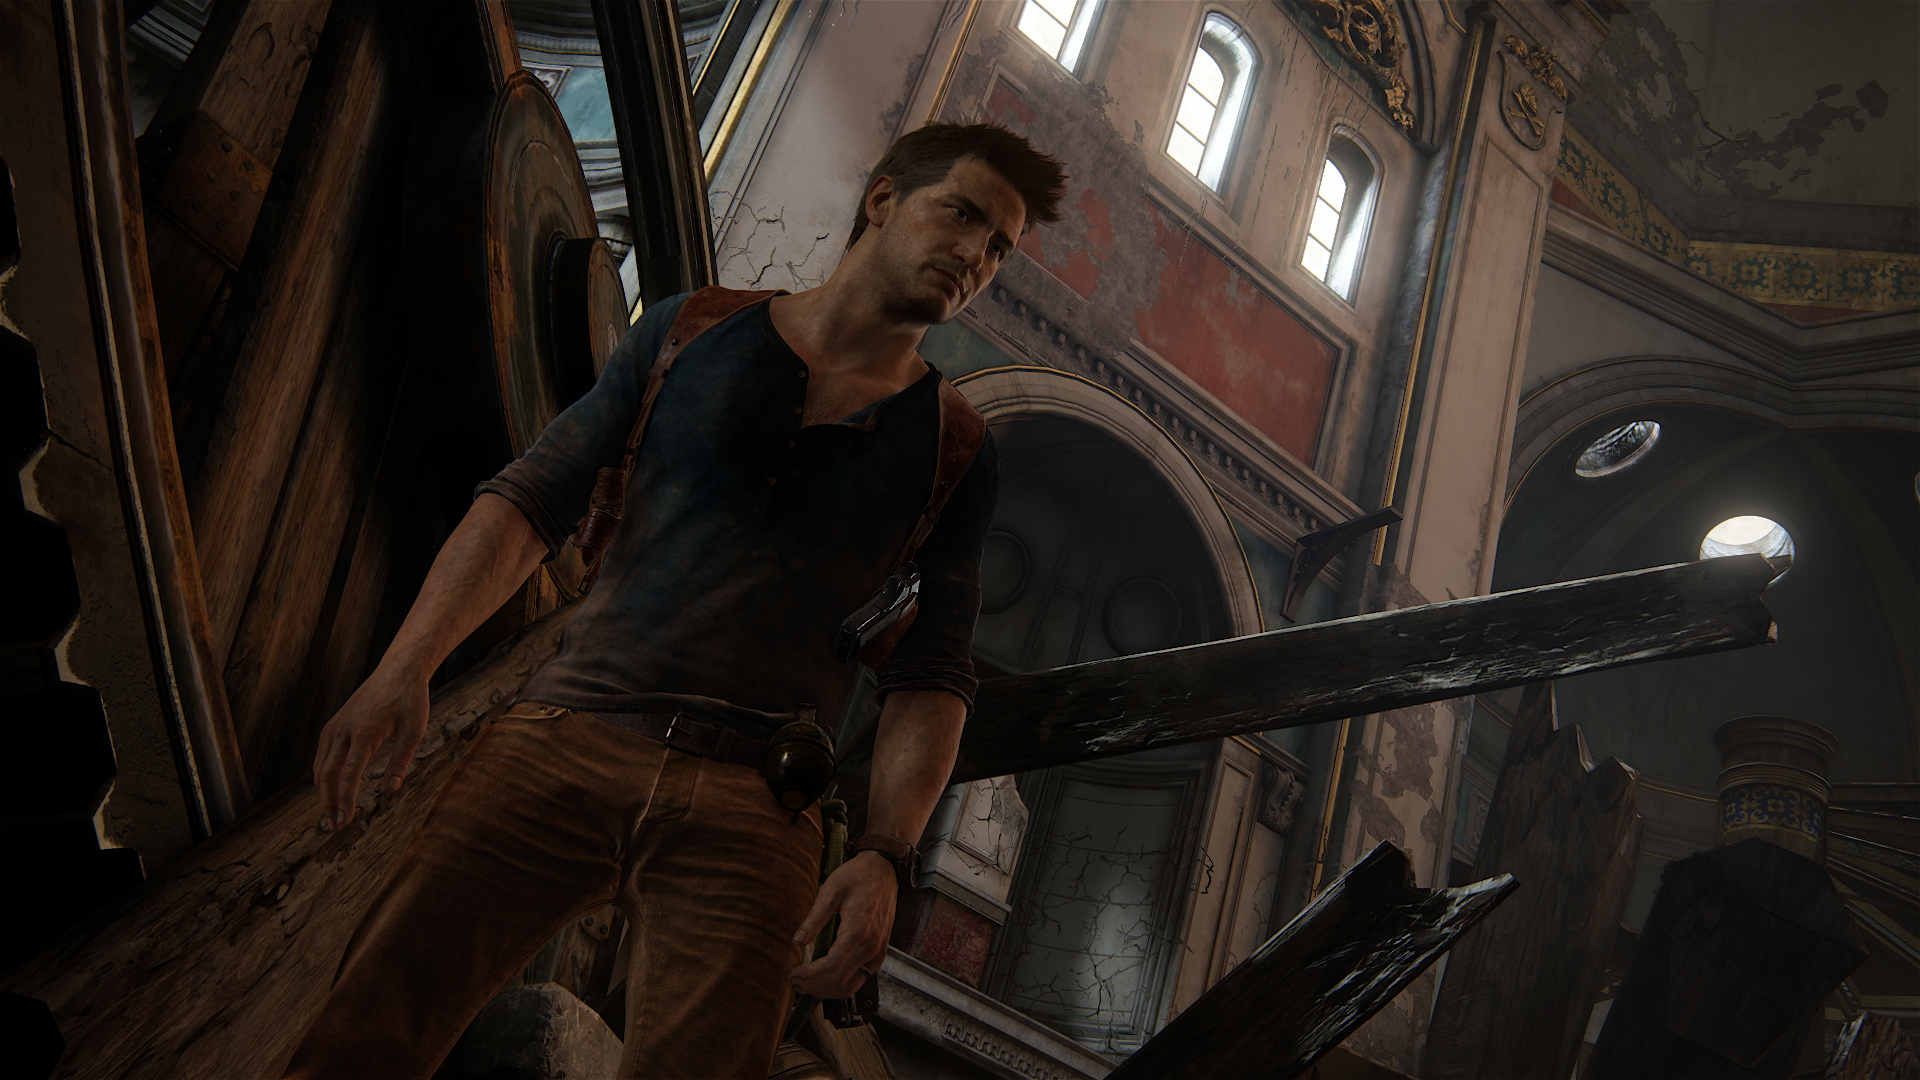 uncharted_4_8_by_gamephotography-davvg61.png